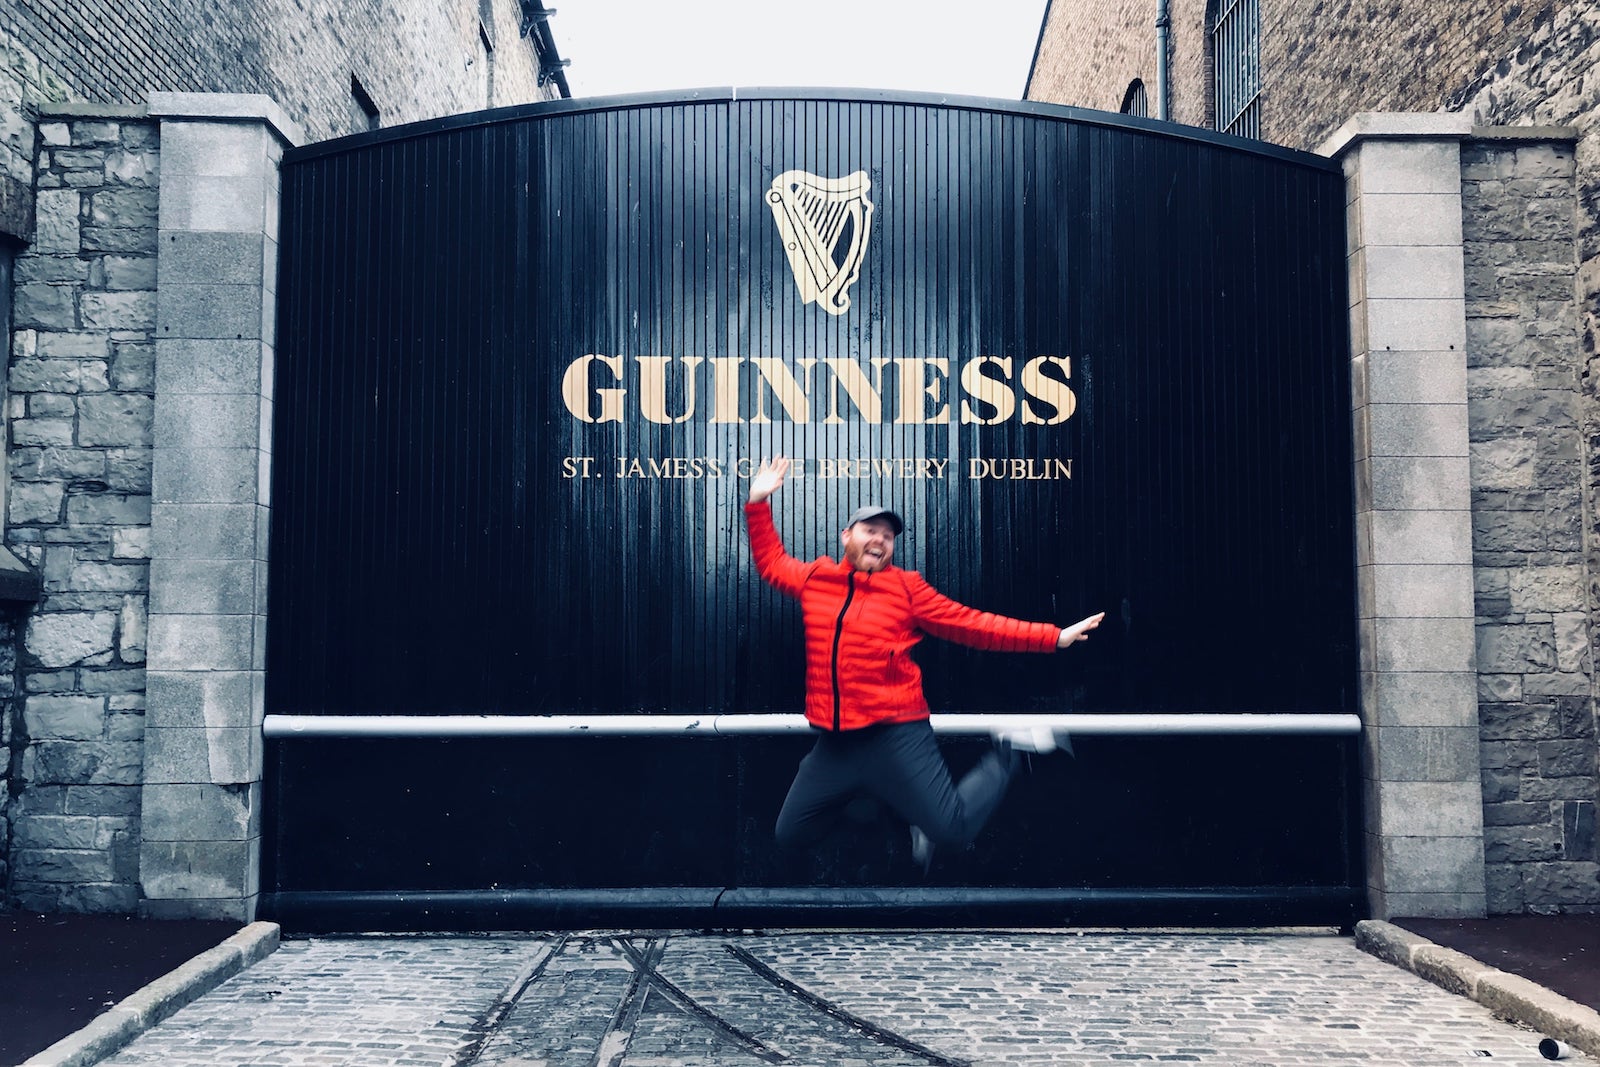 Judson jumps in the air in front of the Guinness Storehouse